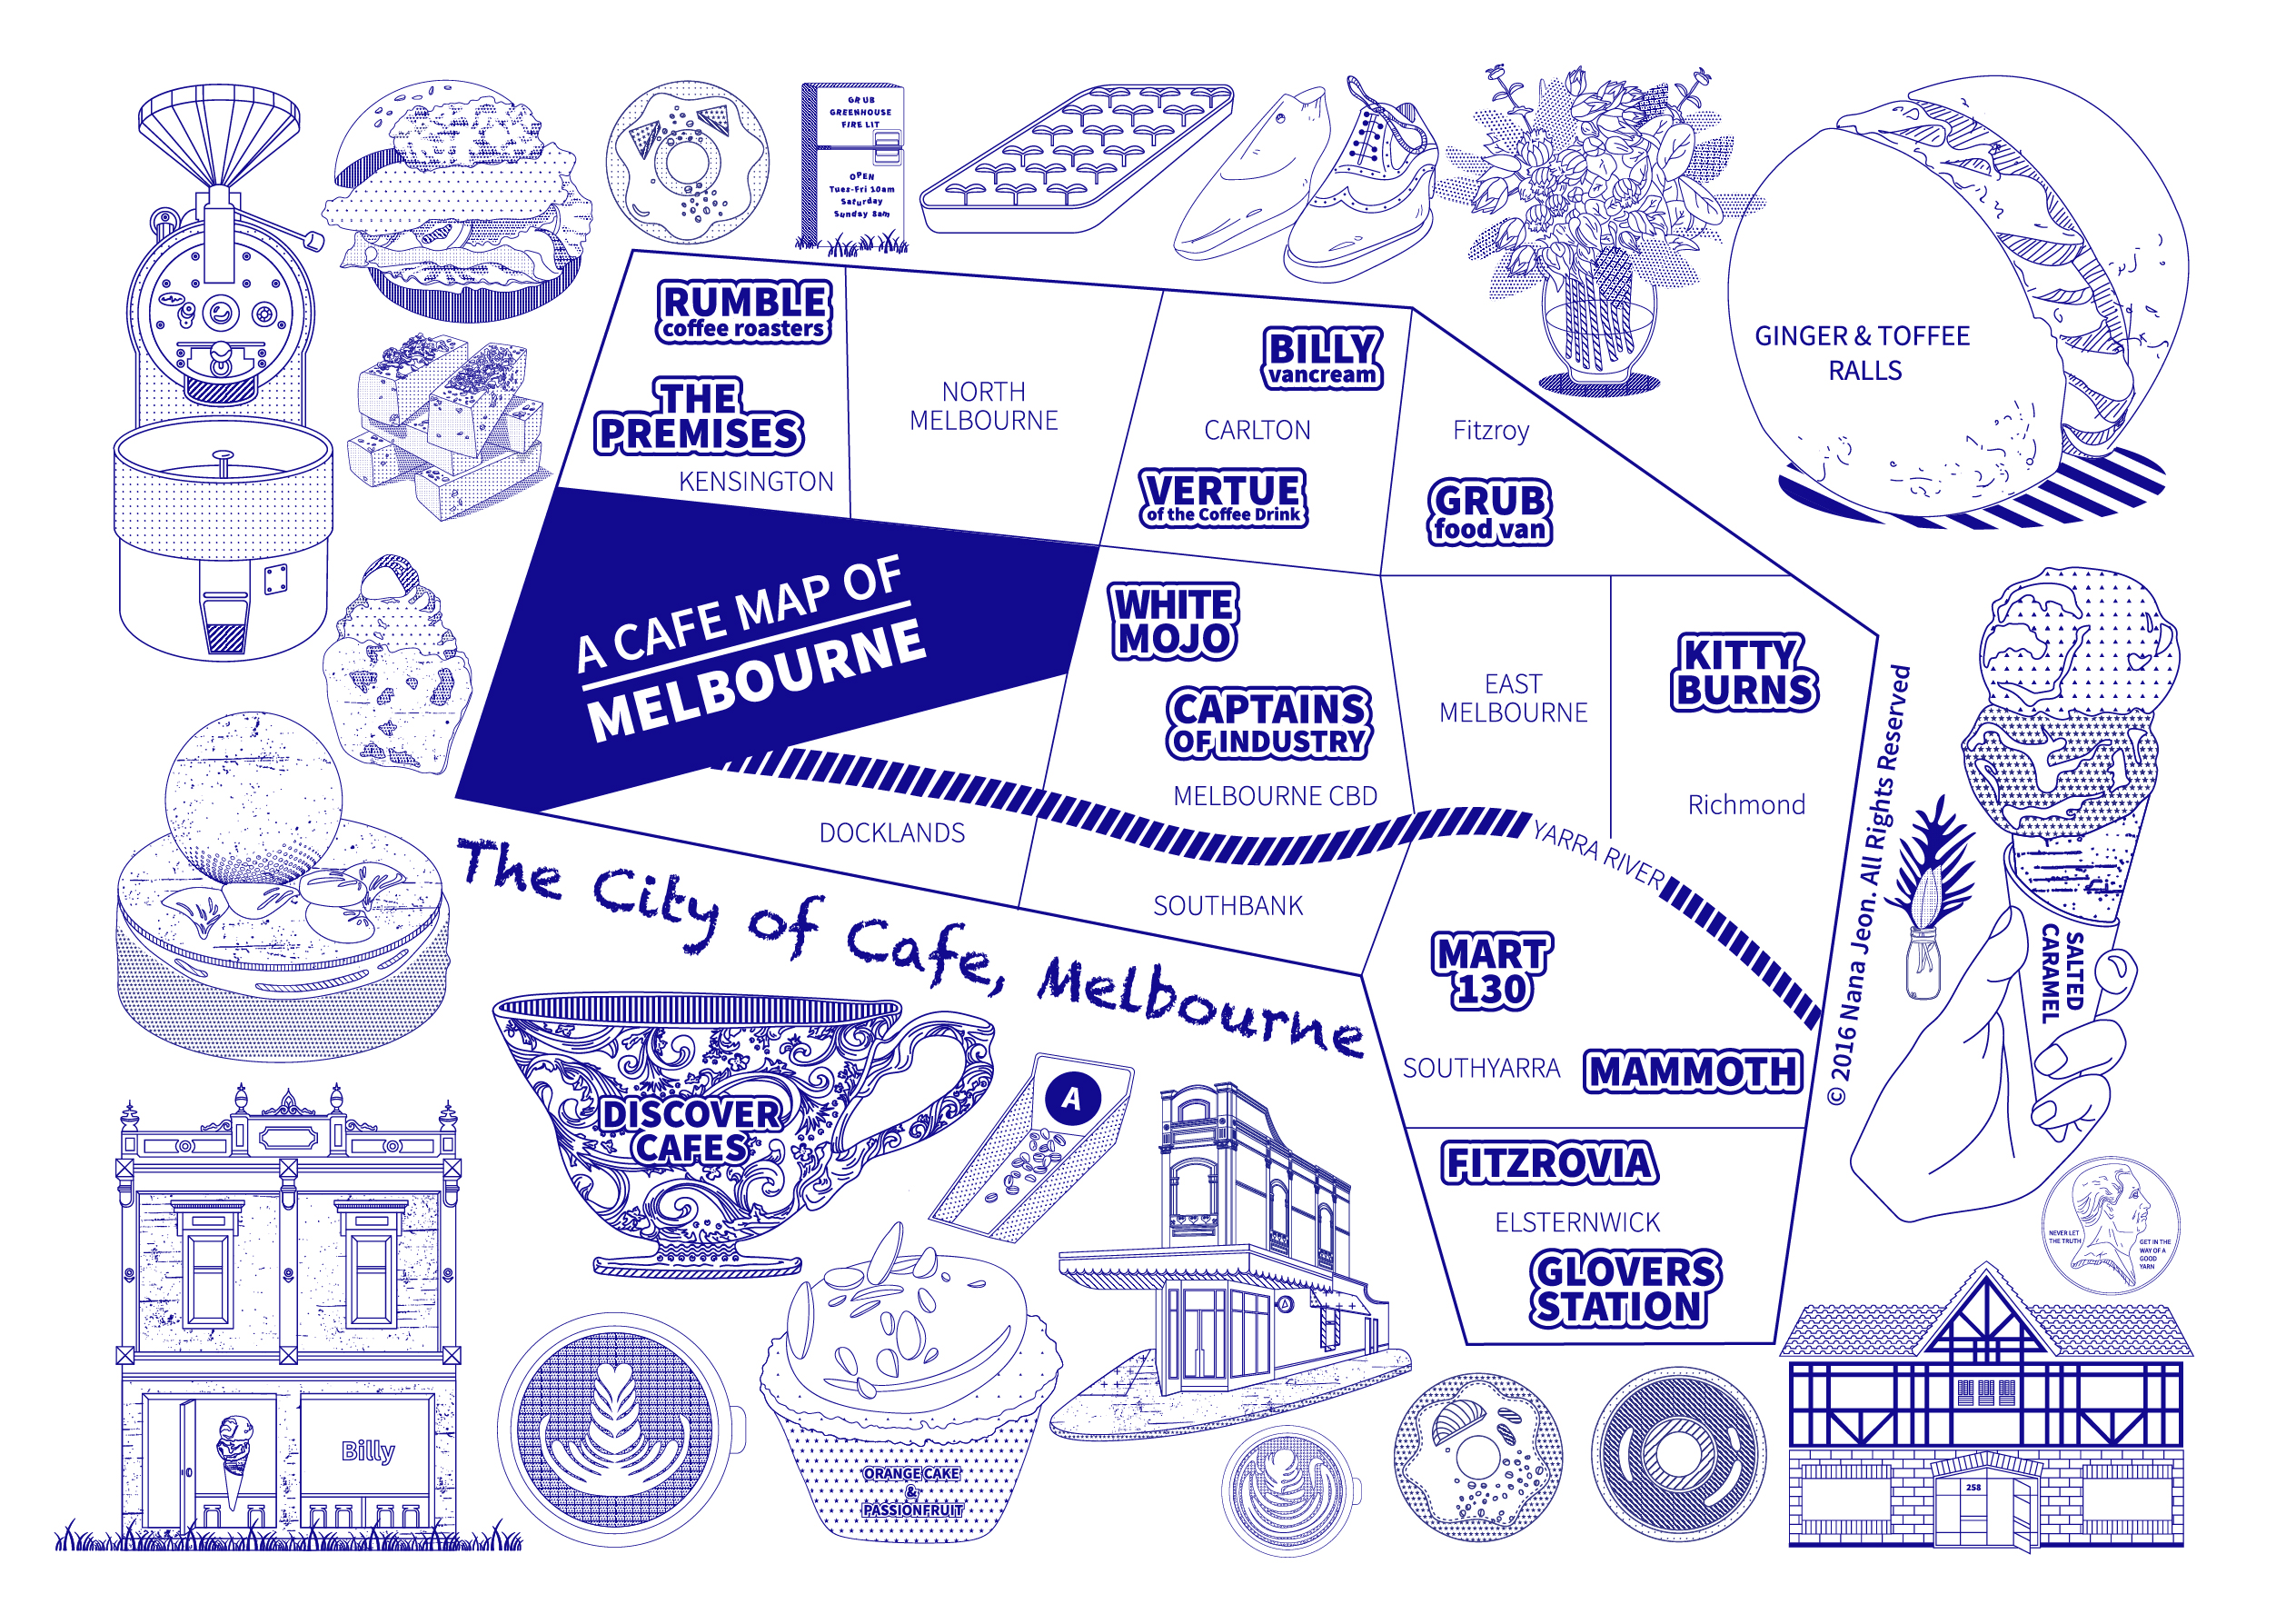 Discover cafes in Melbourne